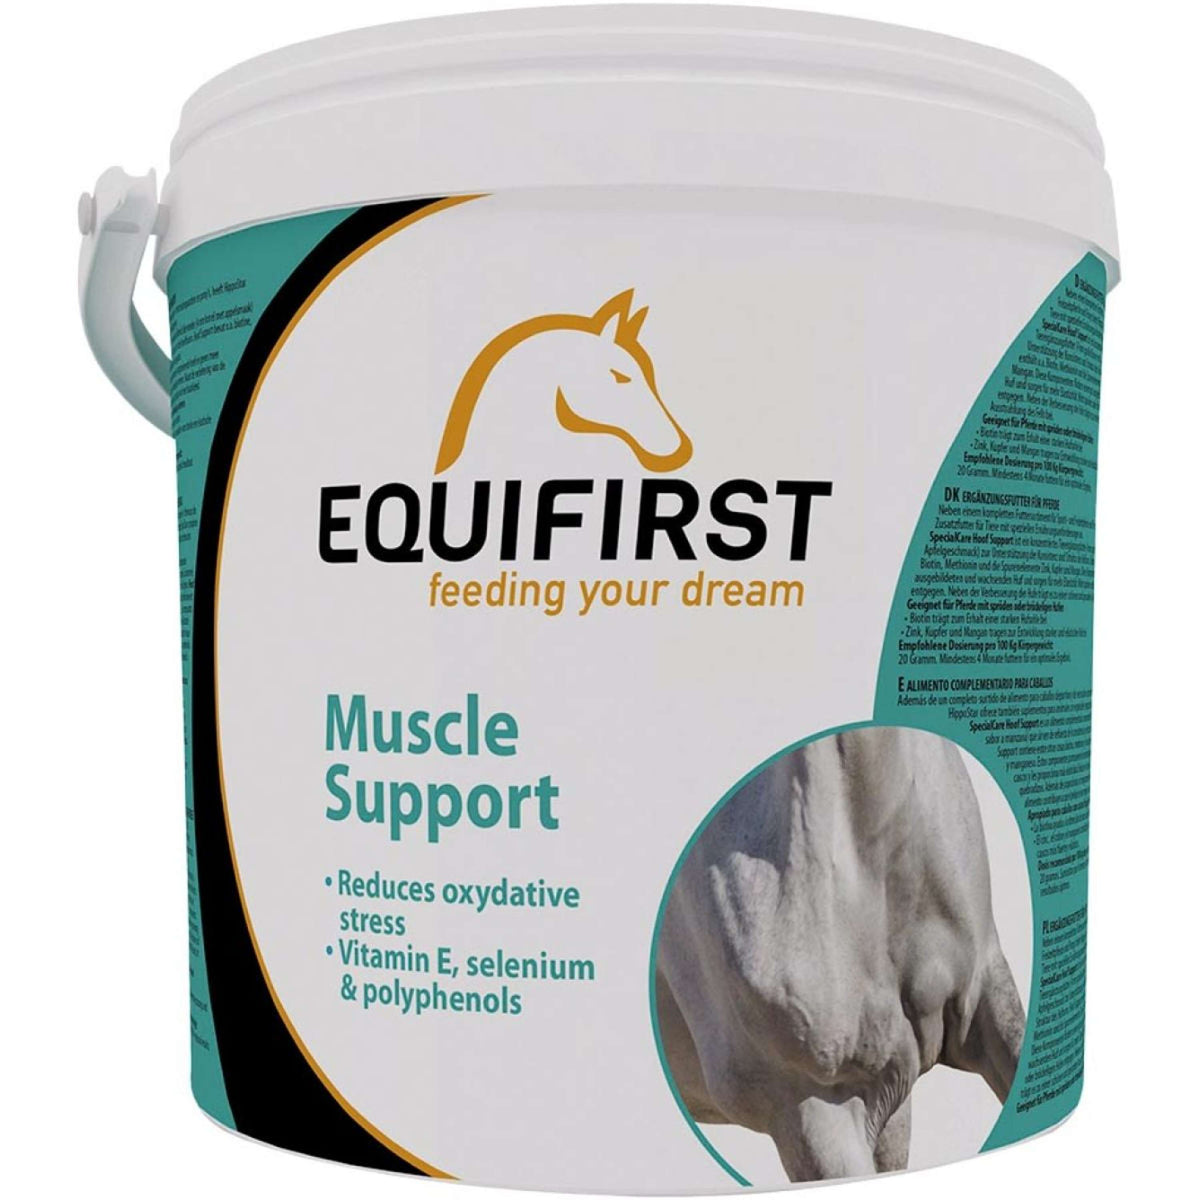 Equifirst Muscle Support